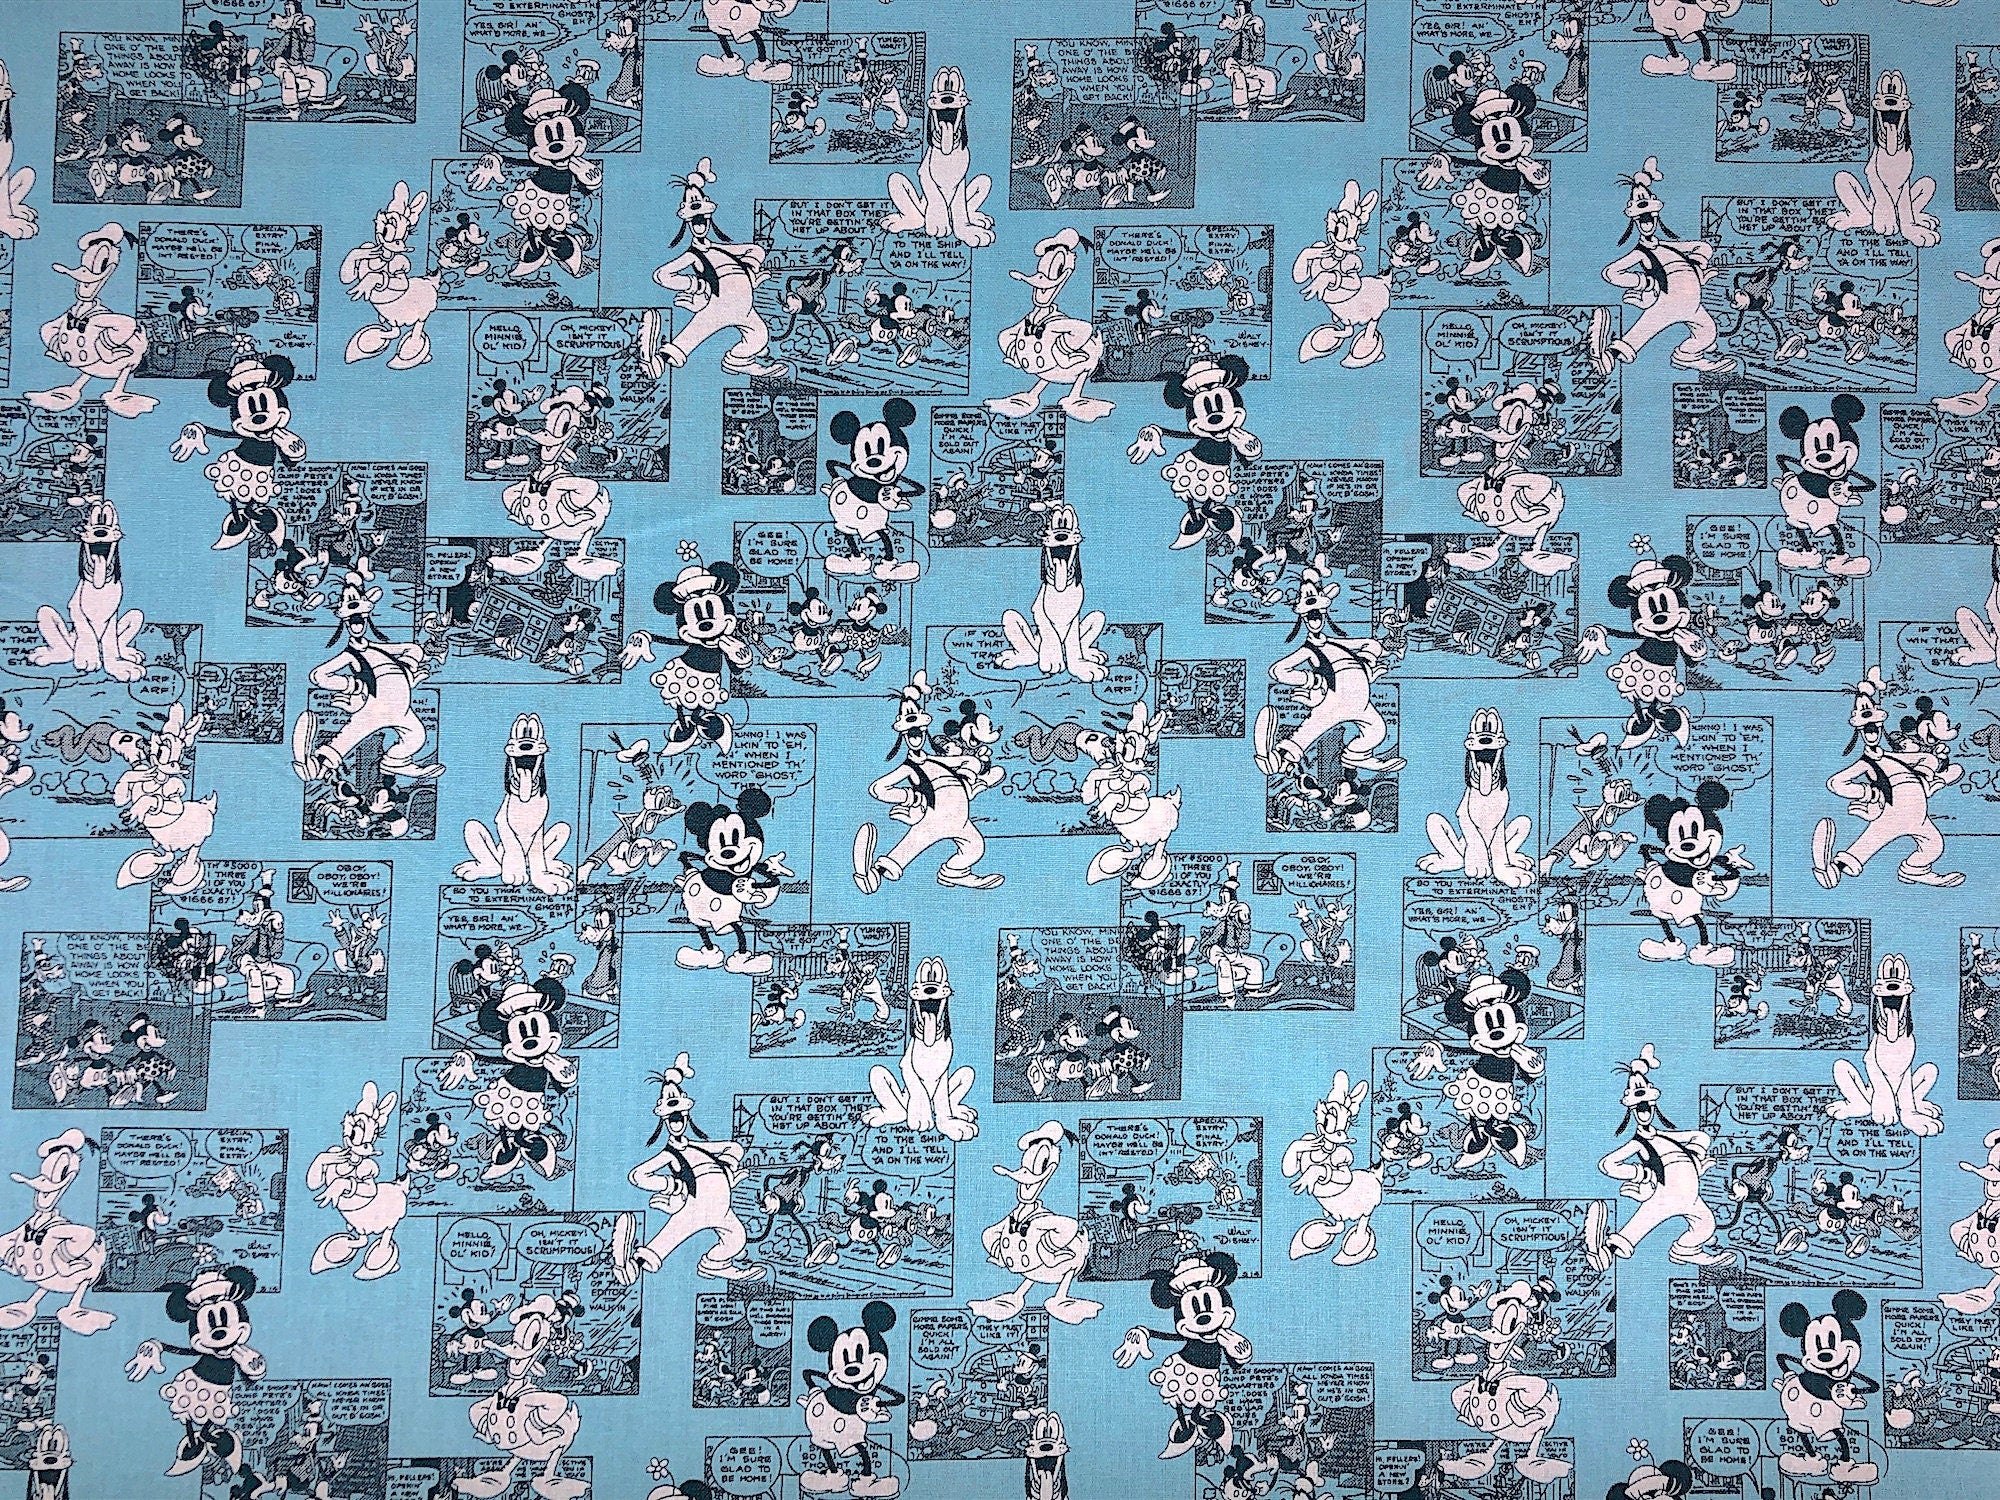 This fabric is called Sensational 6 comic strip and is covered with Mickey Mouse, Minnie Mouse, Pluto, Goofy, Daisy Duck and Donald Duck comic strips